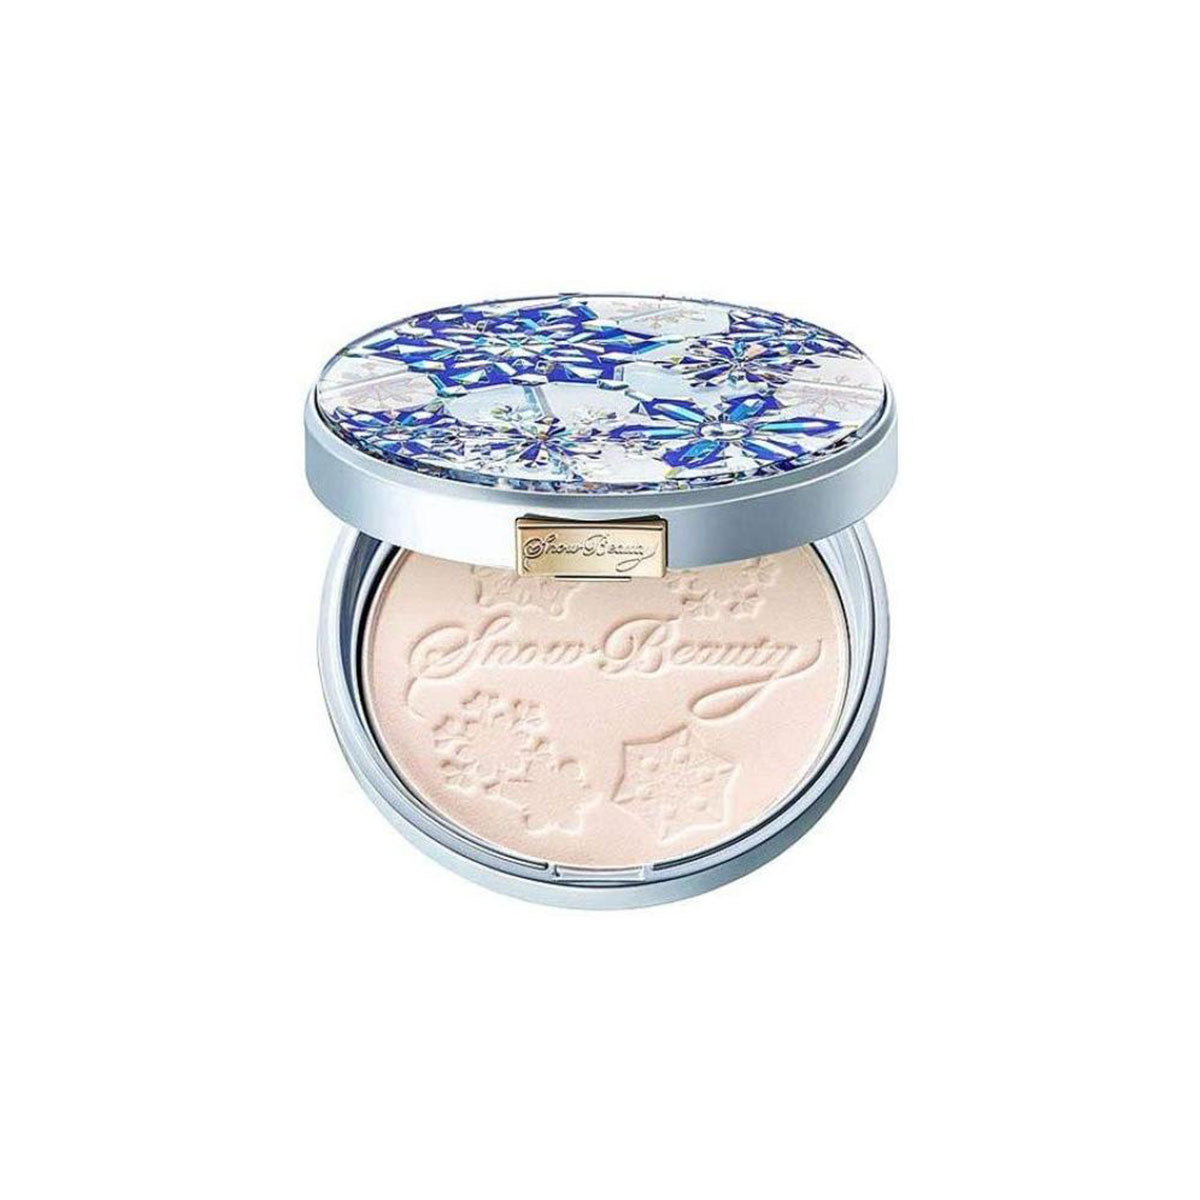 Maquillage  Snow Beauty Whitening Face Powder 25g 2019